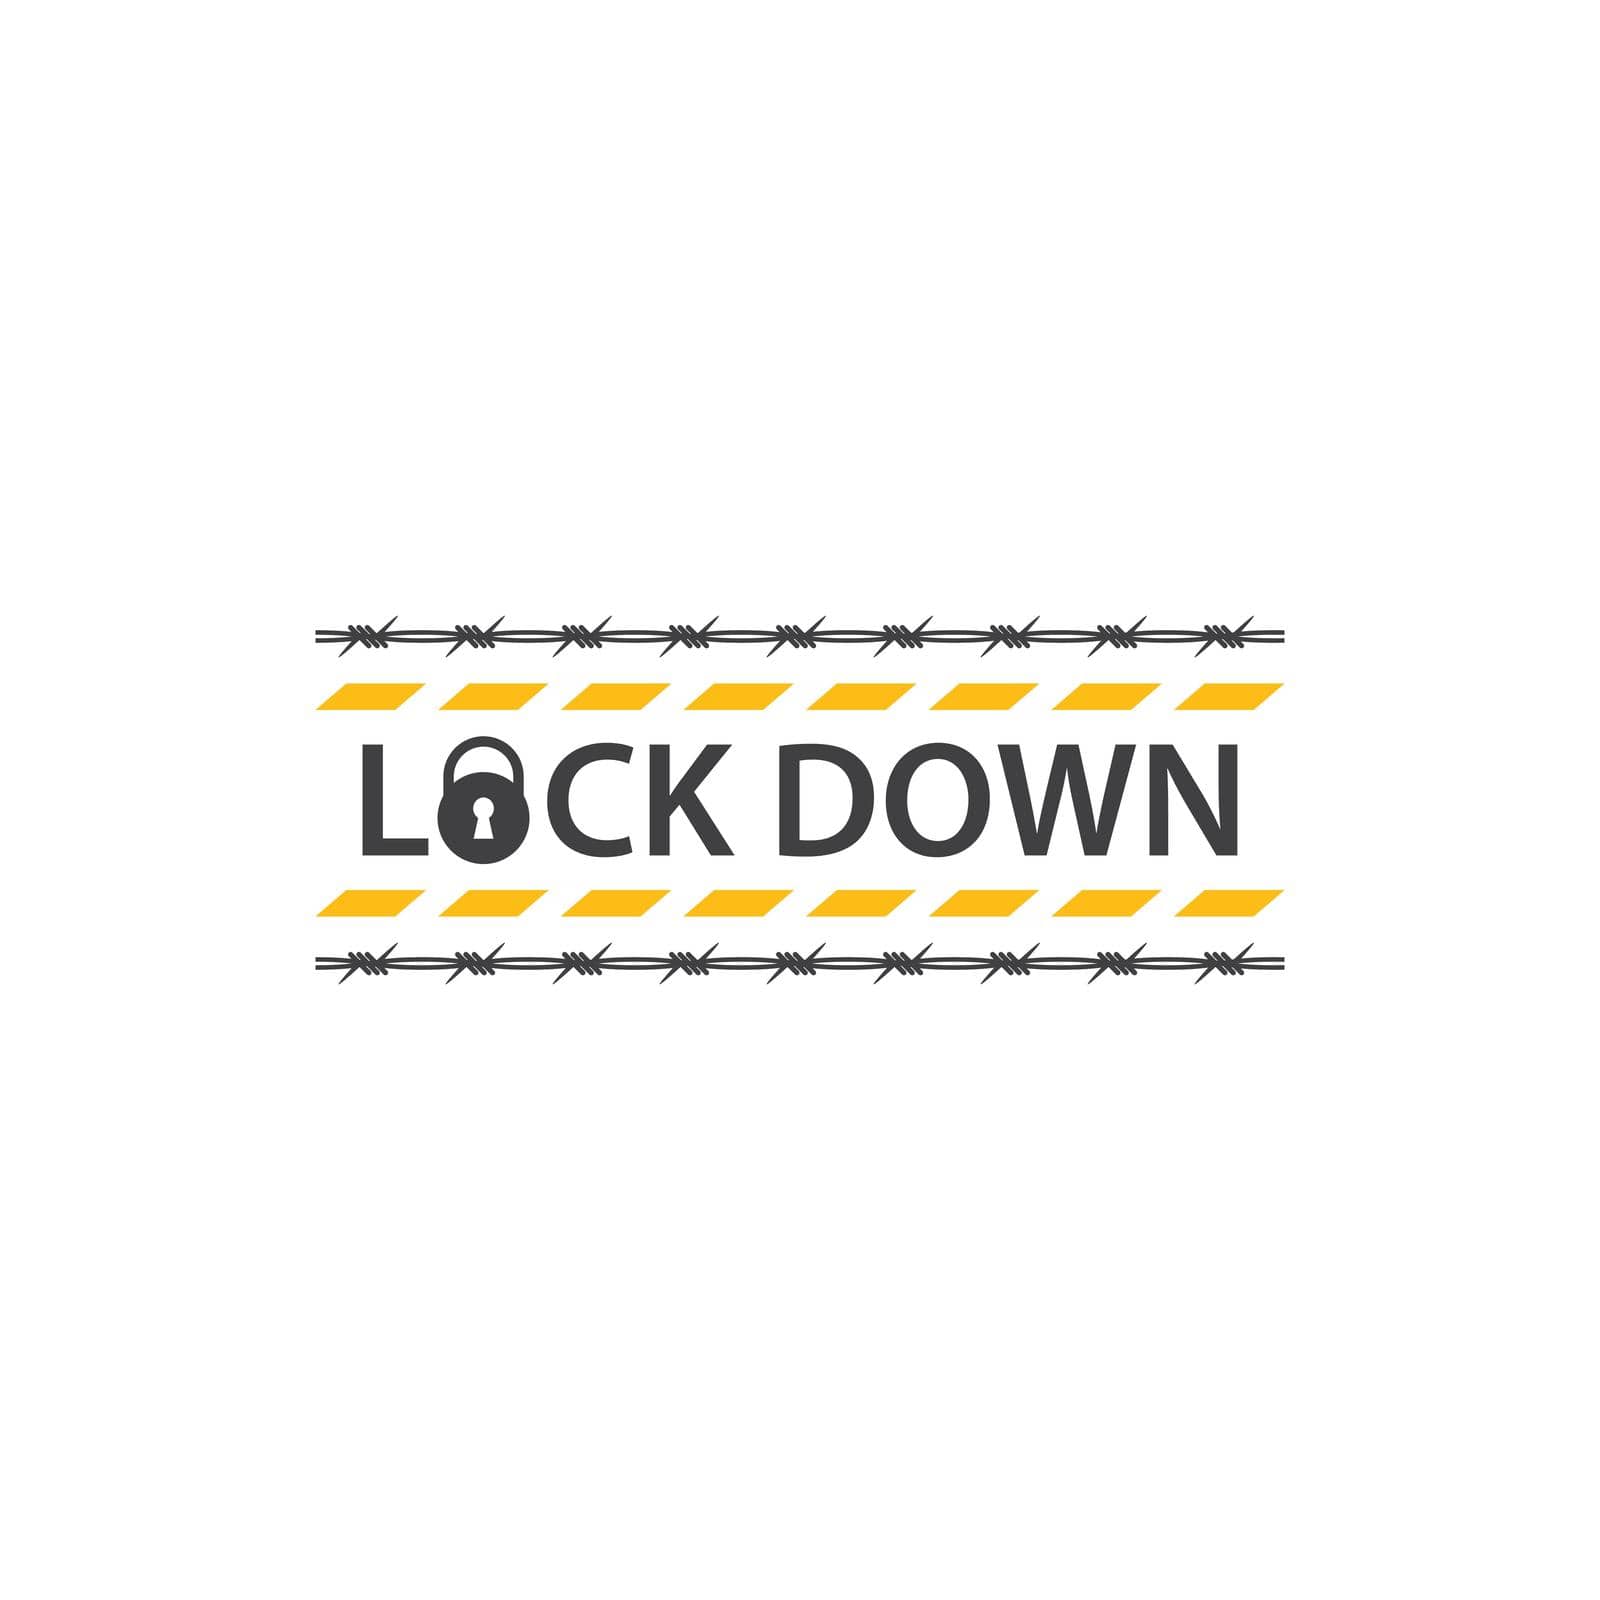 Lockdown dangerous covid-19 infection by awk